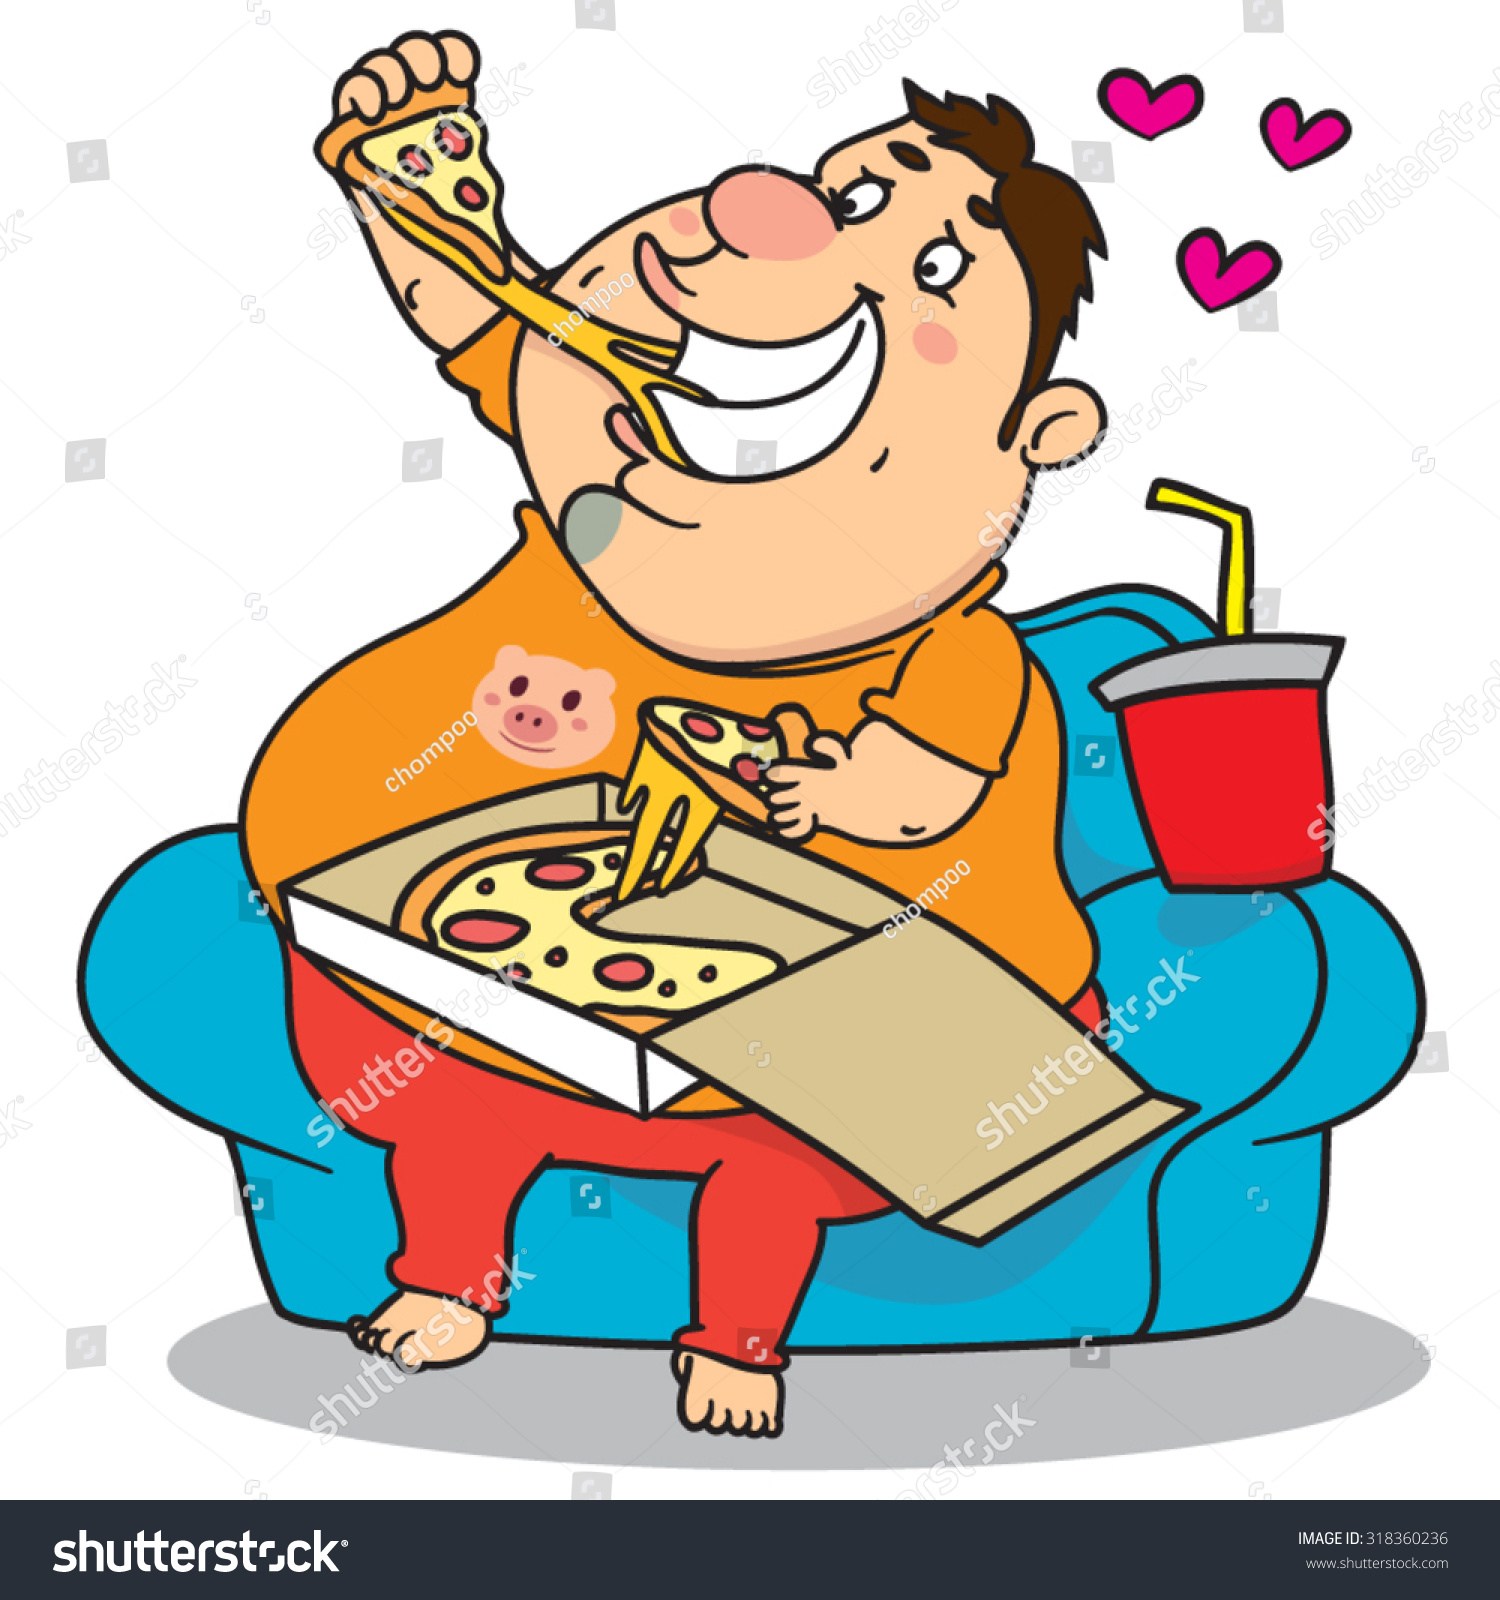 Image result for fat man eating pizza